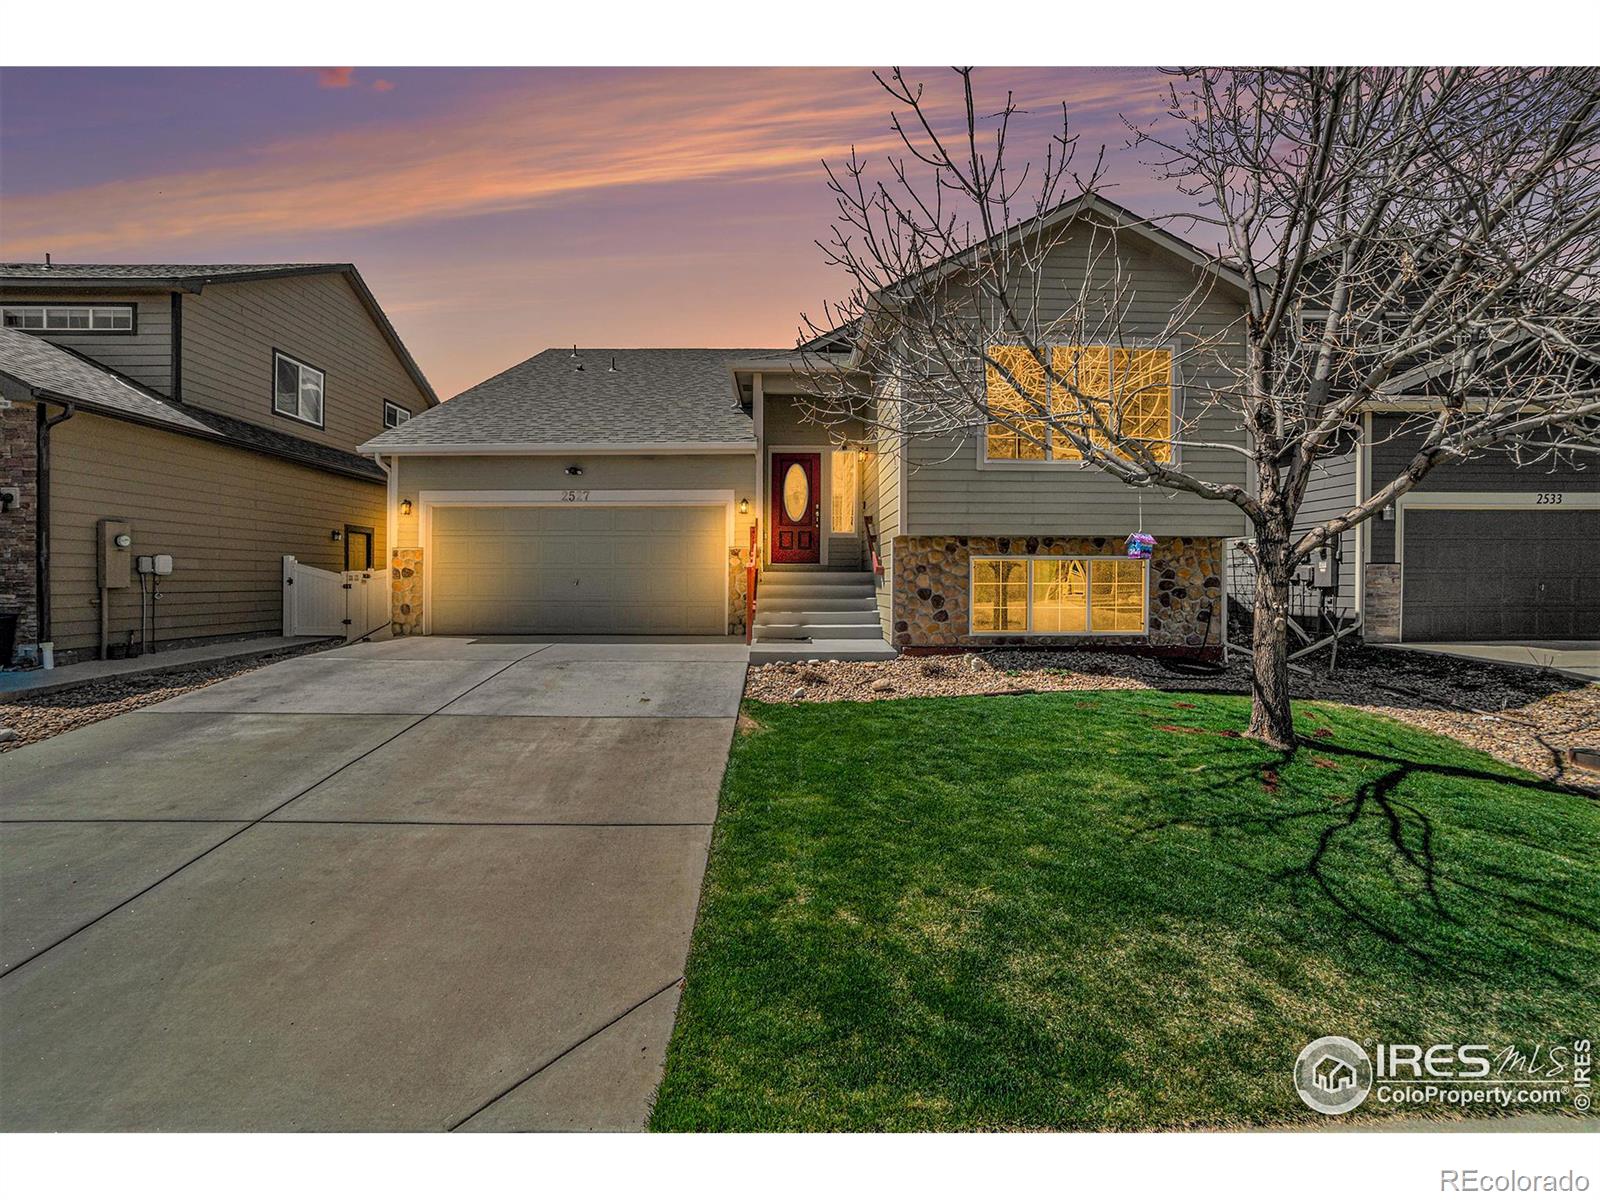 2527  Forecastle Drive, fort collins MLS: 4567891007010 Beds: 3 Baths: 3 Price: $525,000